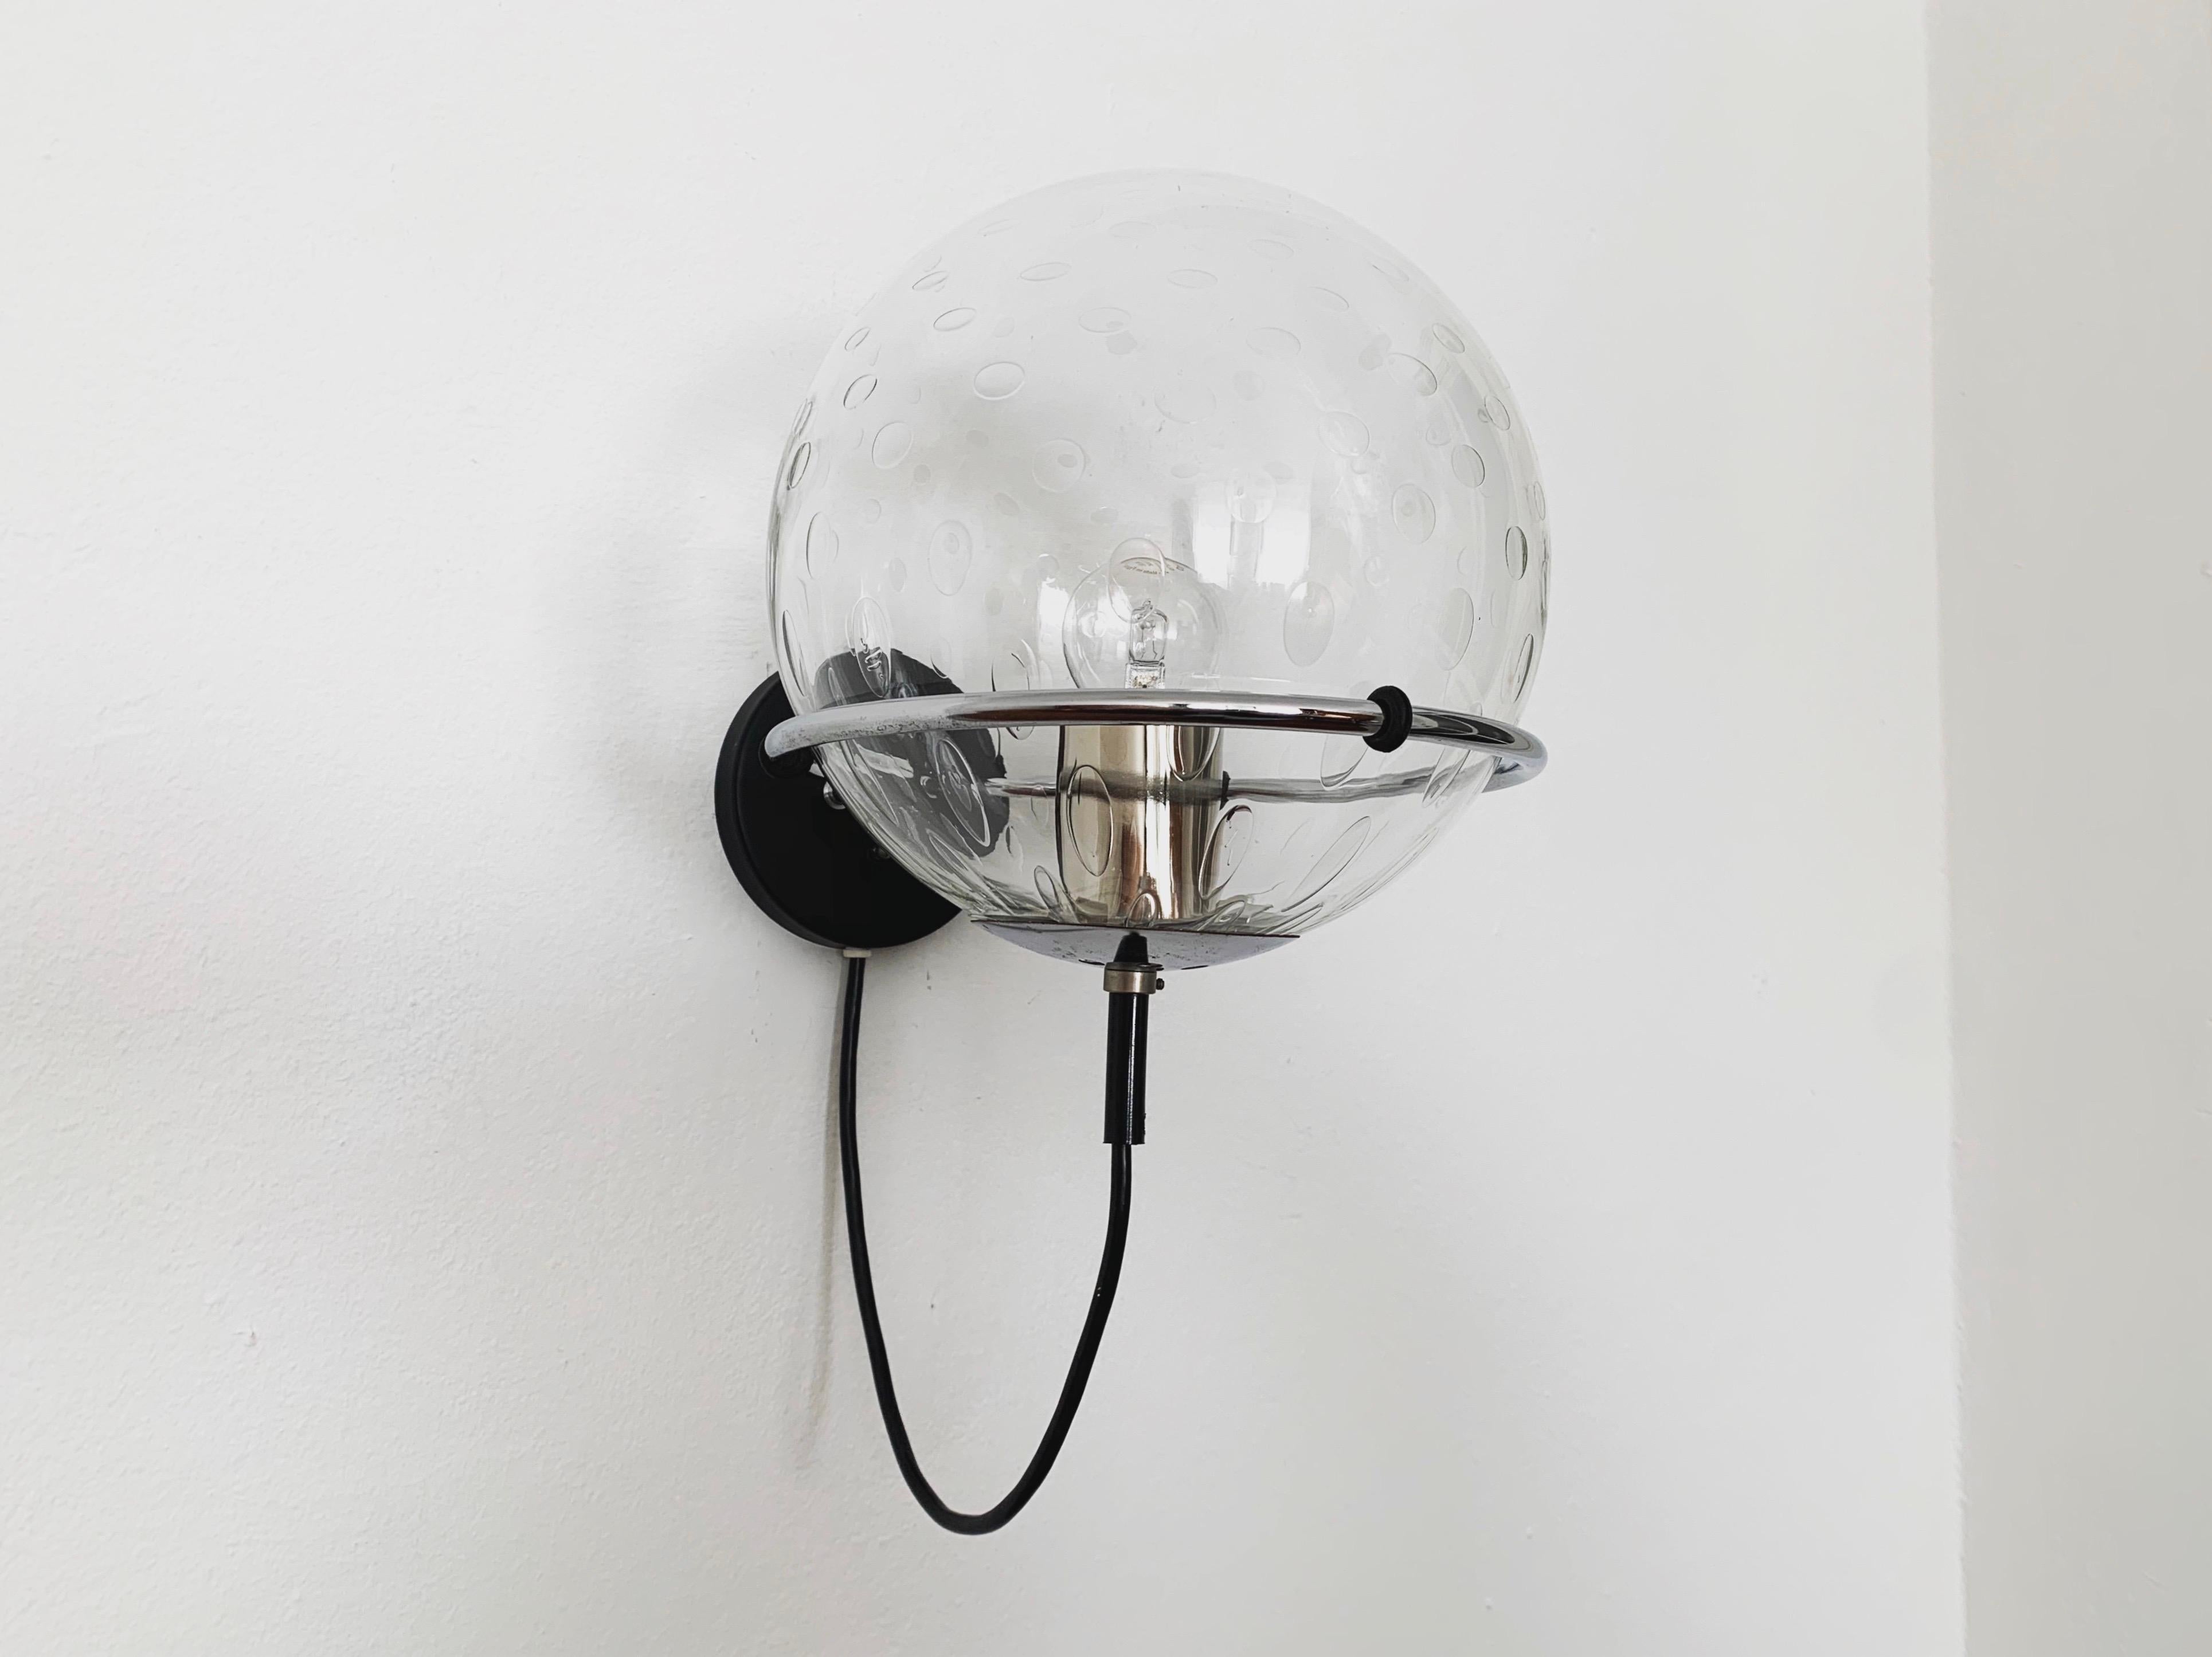 Stunning wall lamp from the 1960s.
Very unusual design and very high quality workmanship.
The design creates a spectacular play of light.

Manufacturer: Raak Amsterdam

Condition:

Very good vintage condition with slight signs of wear